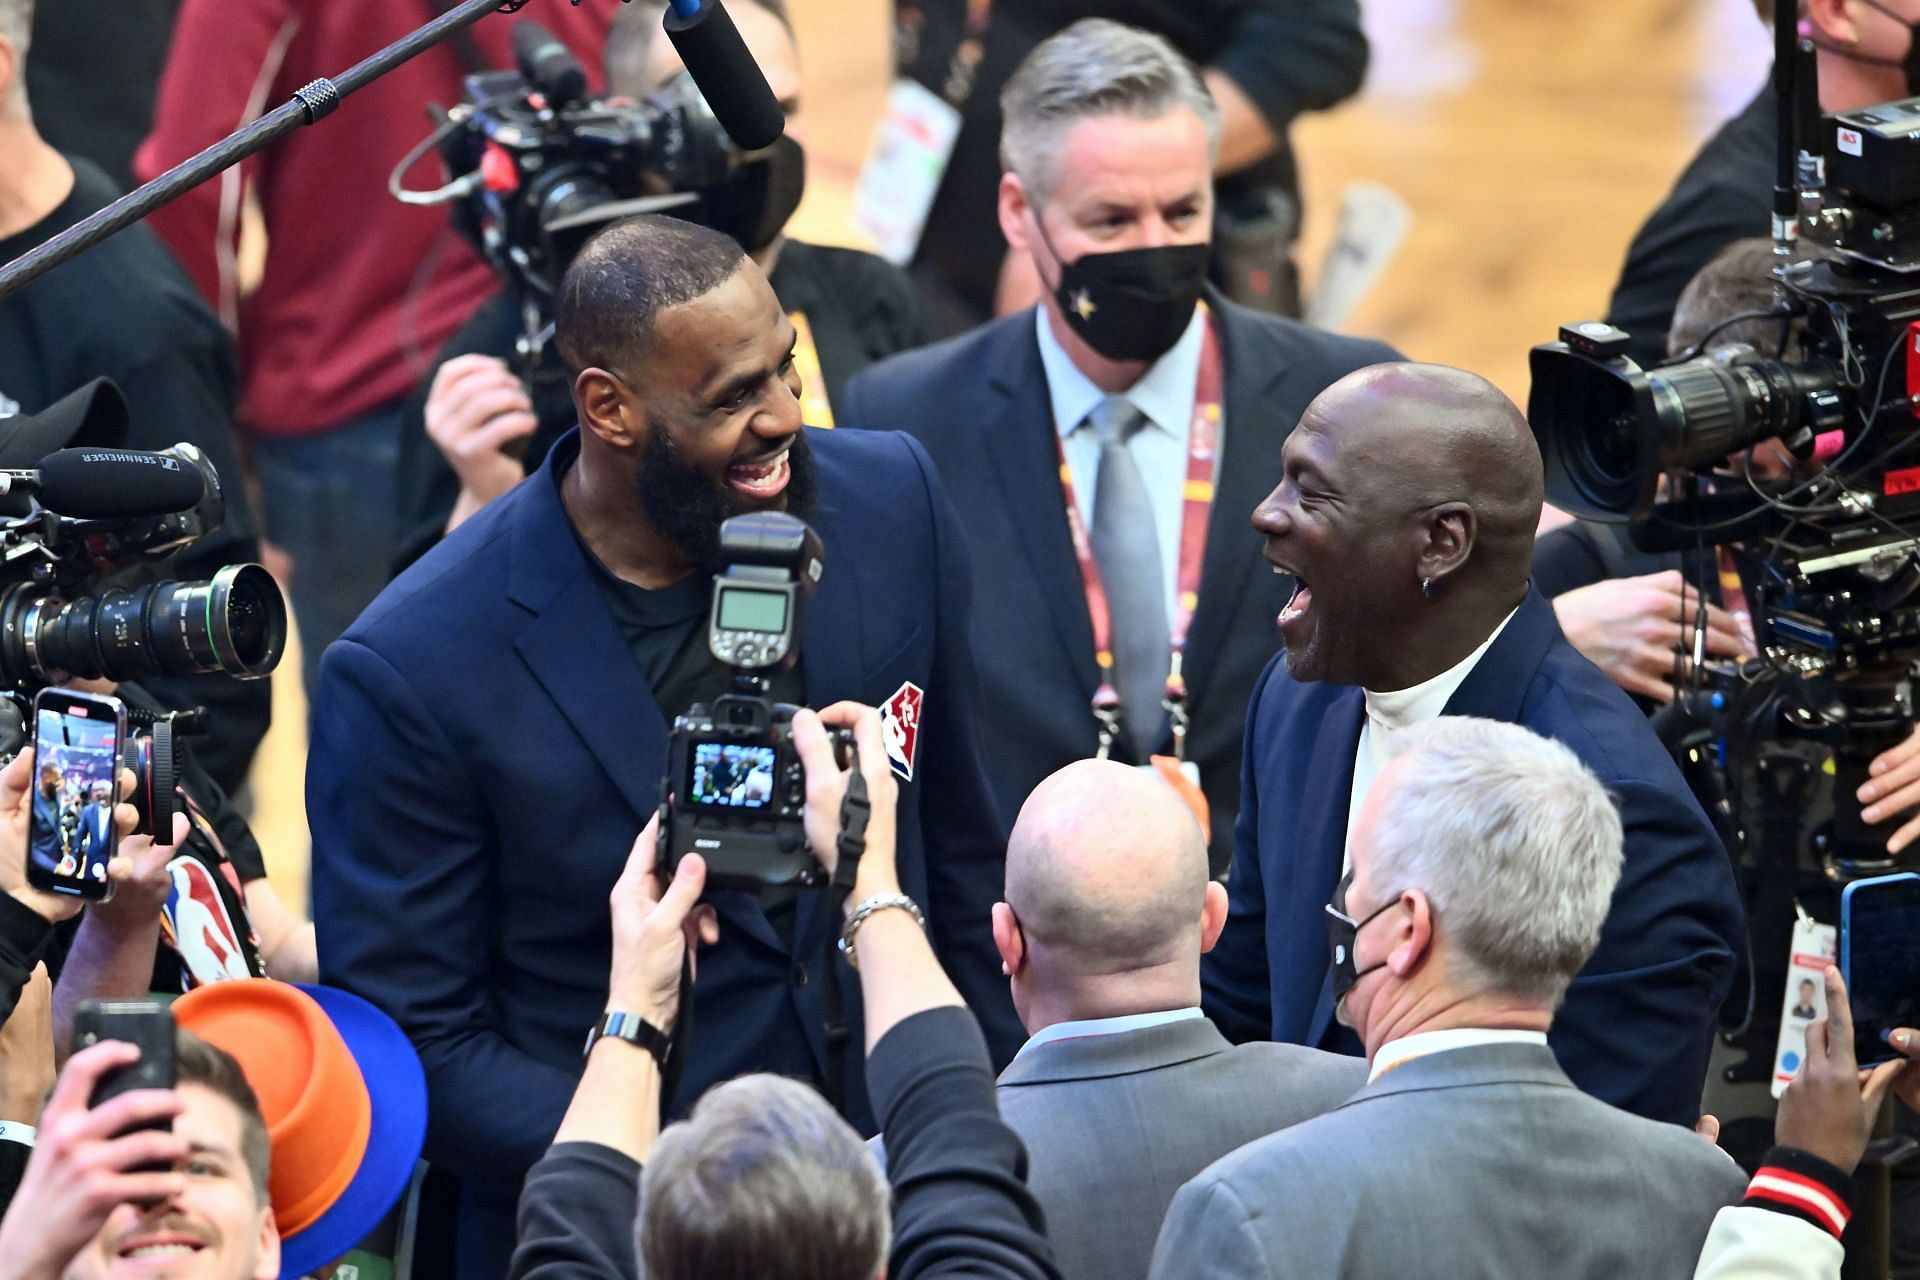 Michael Jordan and LeBron James interact after the presentation of the NBA 75th Anniversary Team